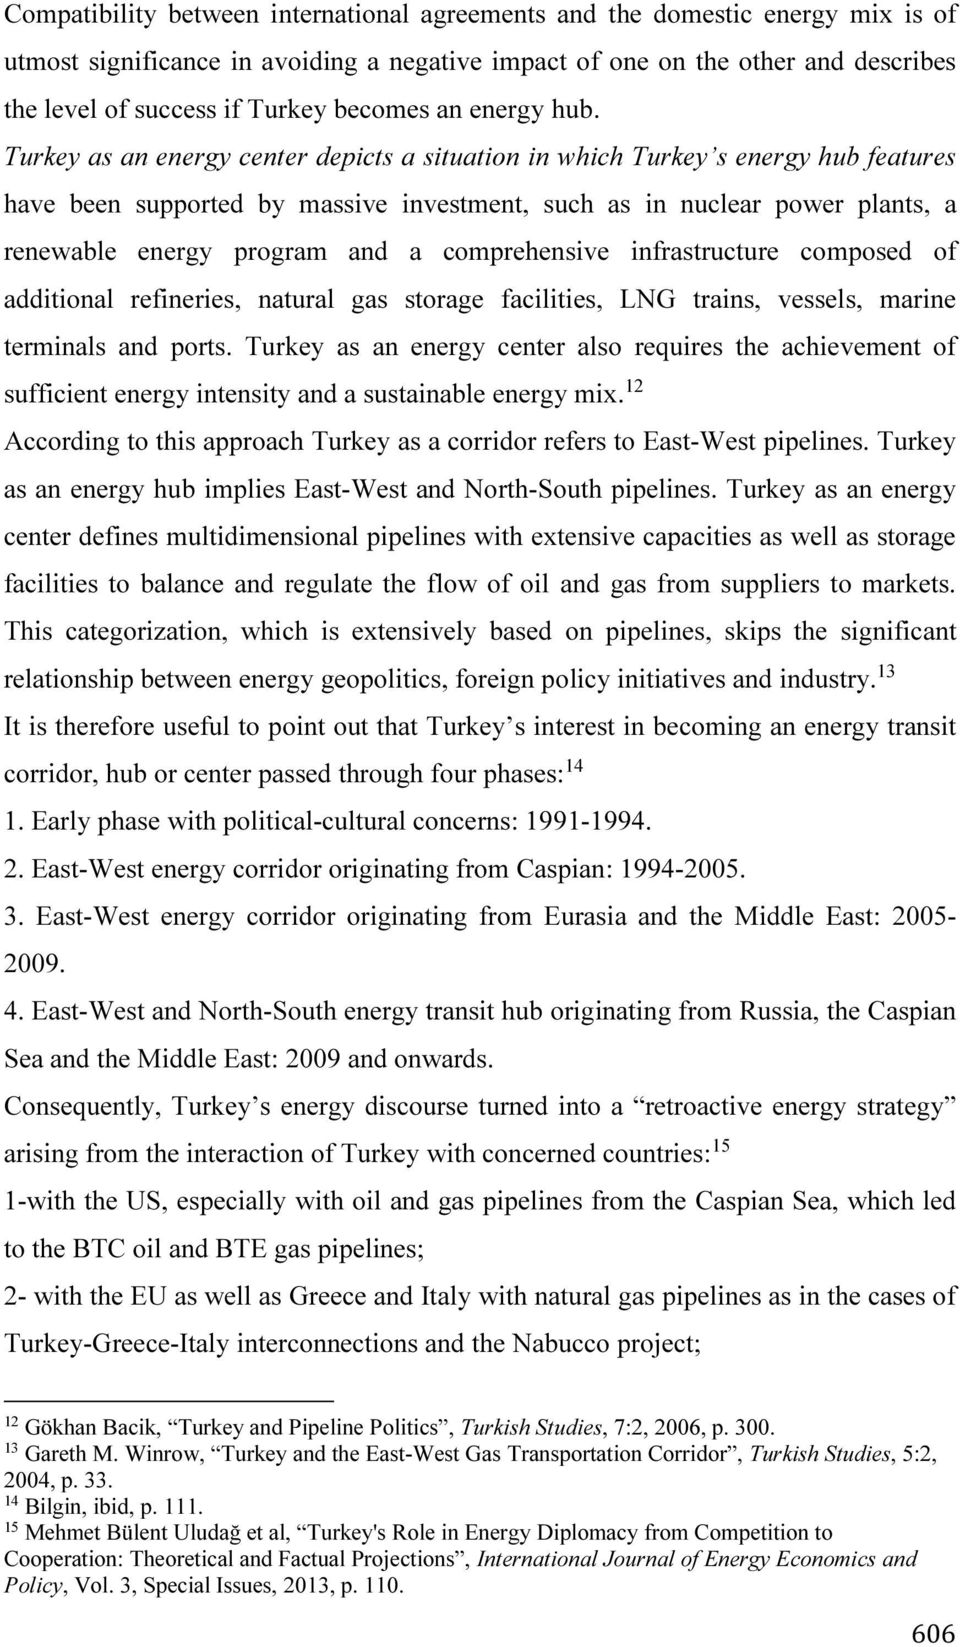 Turkey as an energy center depicts a situation in which Turkey s energy hub features have been supported by massive investment, such as in nuclear power plants, a renewable energy program and a